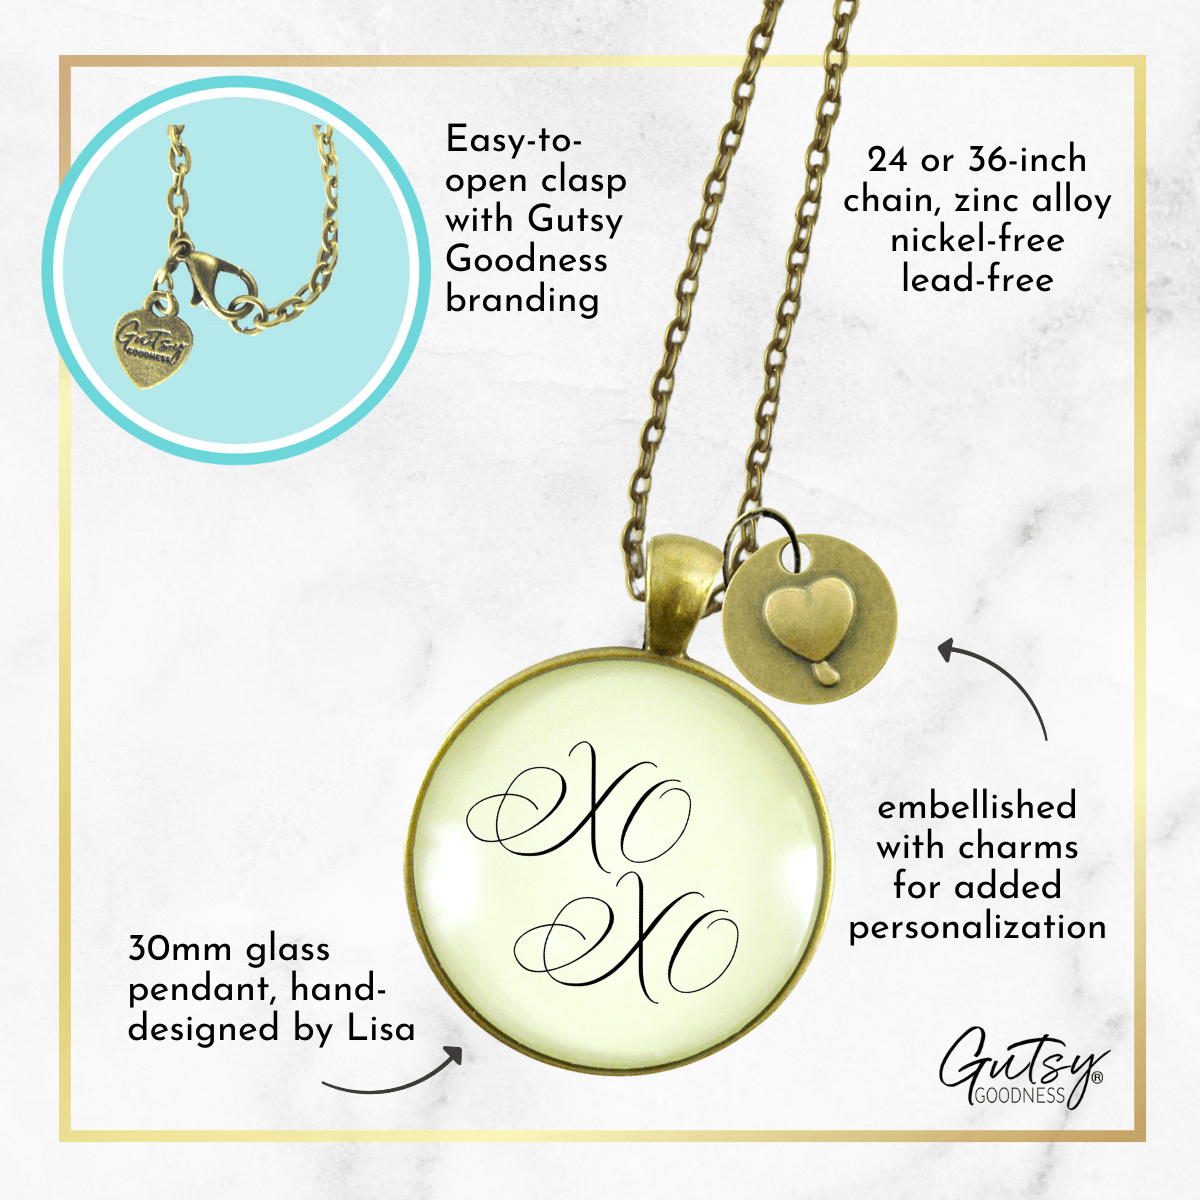 Gutsy Goodness XO Hugs and Kisses Necklace Vintage Love Romantic Heart Charm Gift - Gutsy Goodness;Xo Hugs And Kisses Necklace Vintage Love Romantic Heart Charm Gift - Gutsy Goodness Handmade Jewelry Gifts